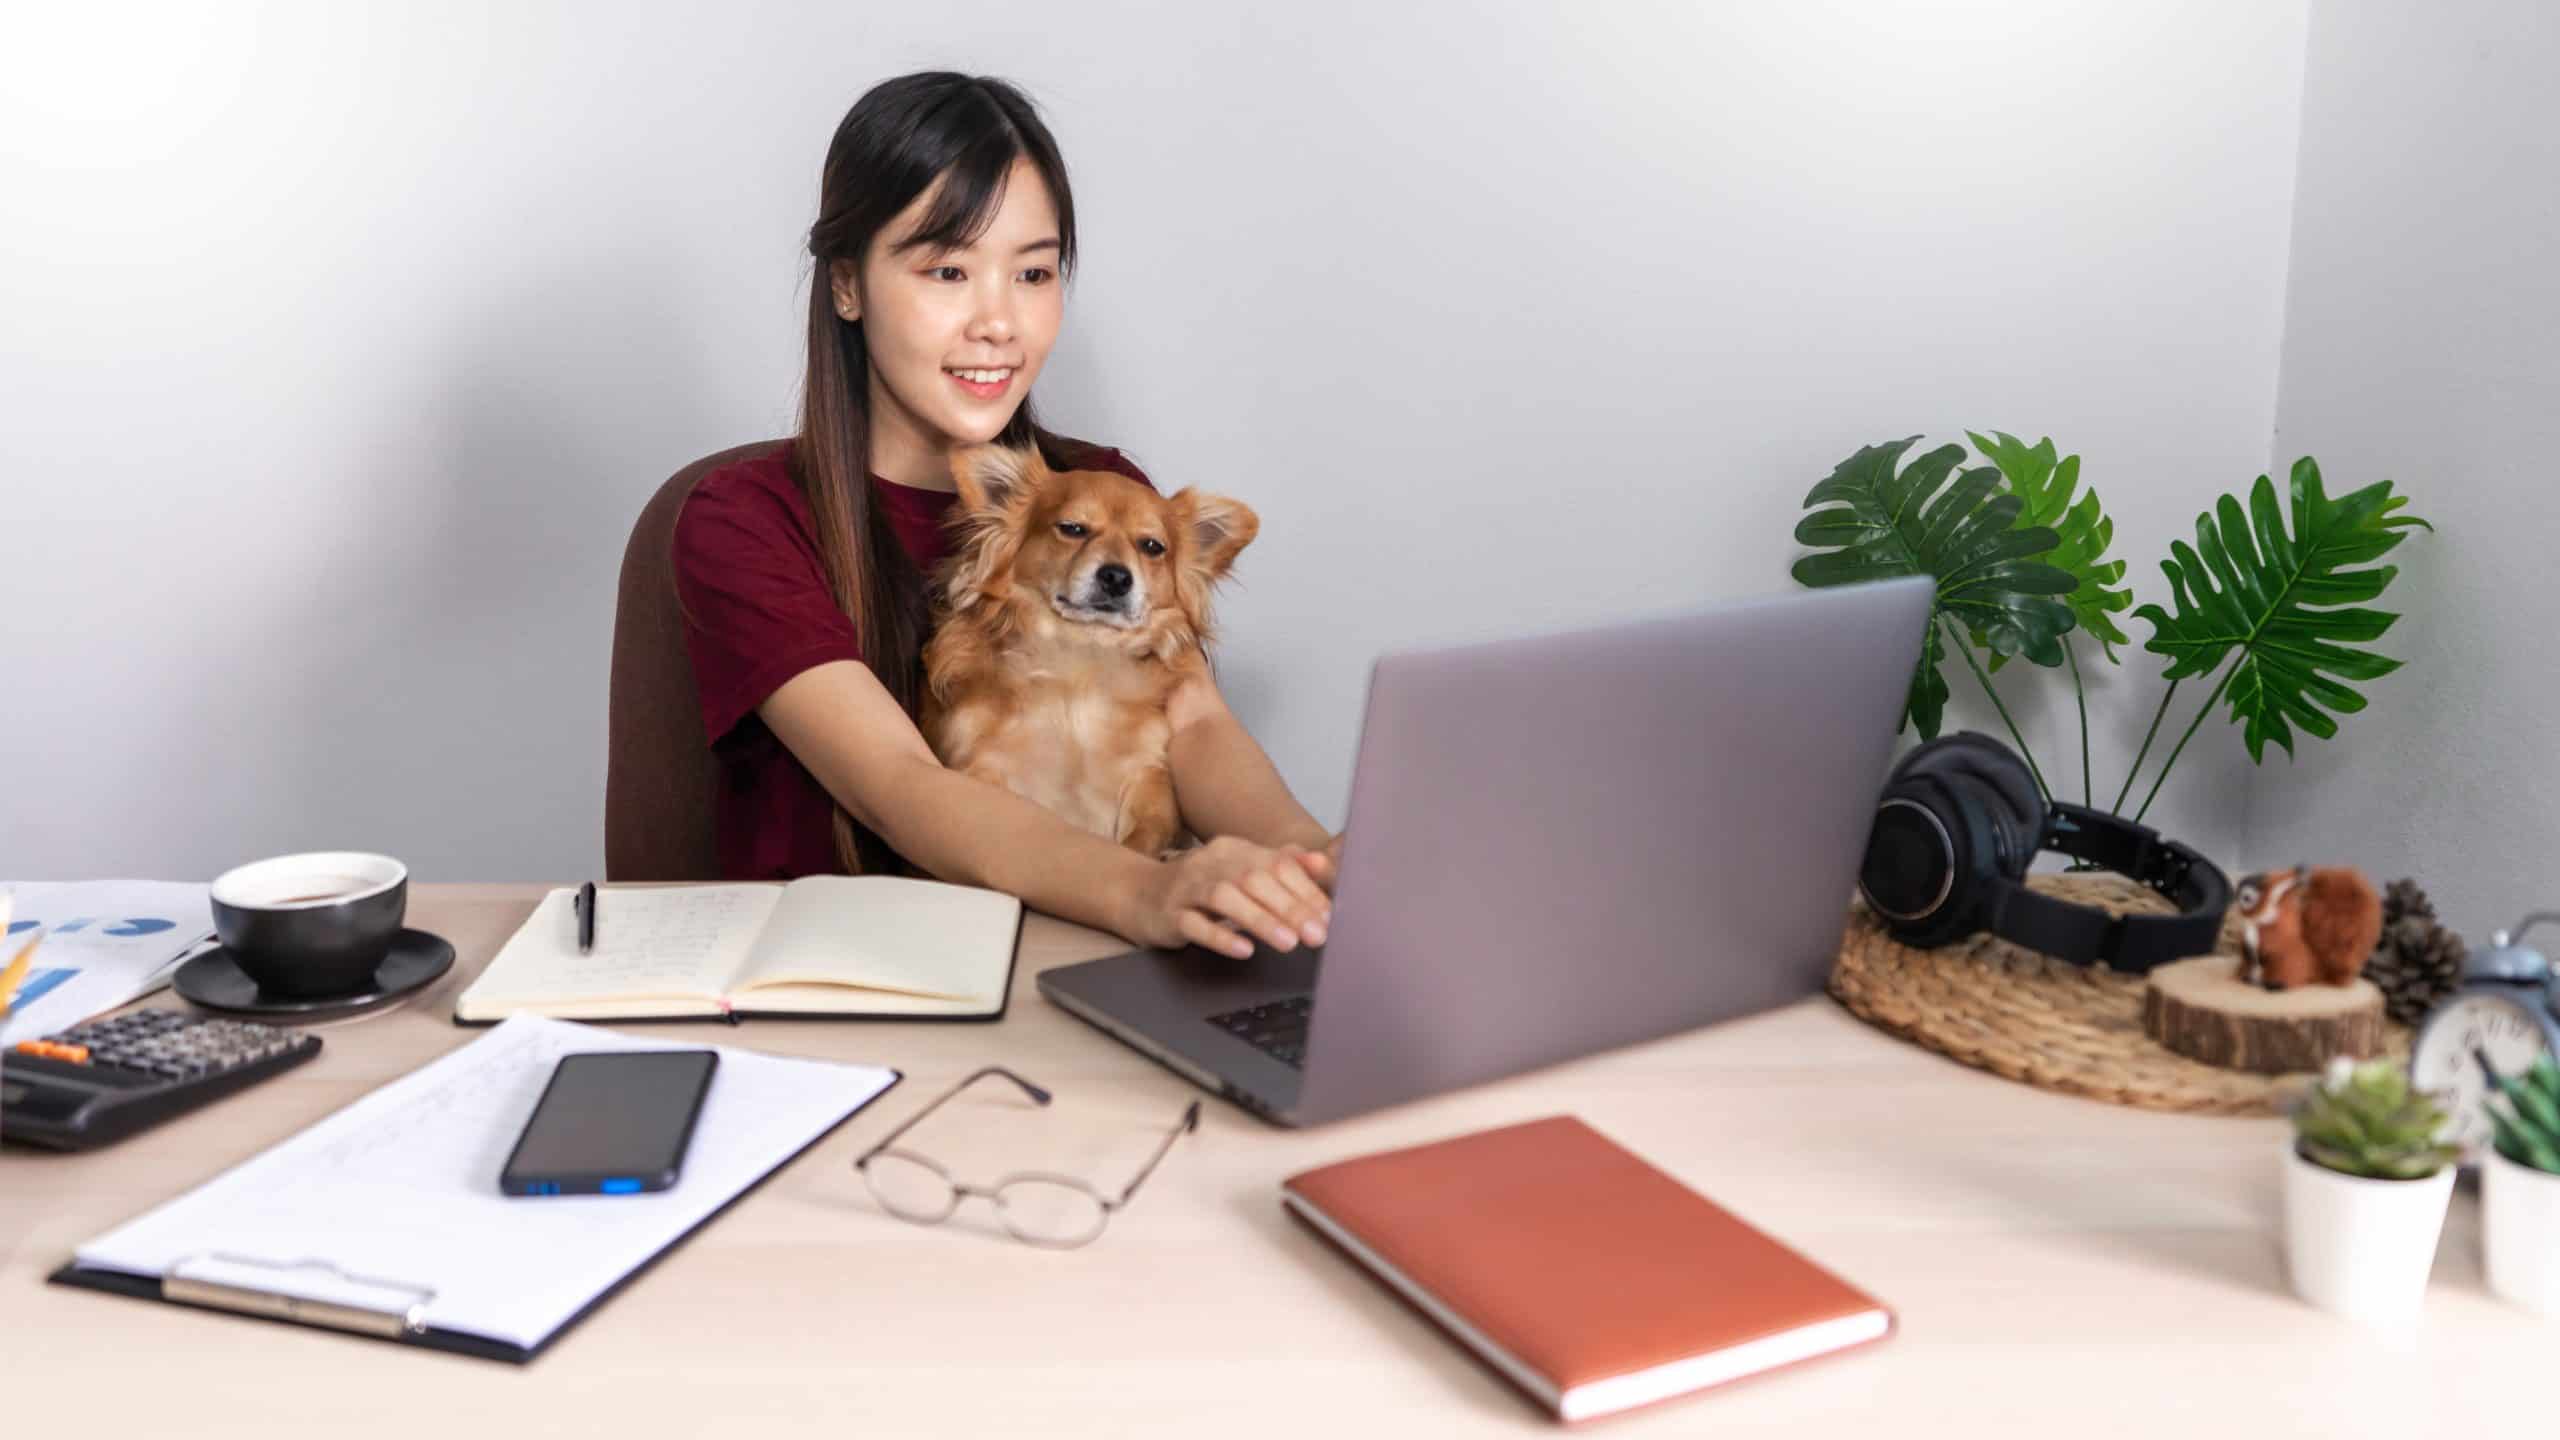 Woman works from home on laptop while holding her dog on her lap. Working from home with your dog: Set boundaries, entertain your dog, and train him to understand the new normal.